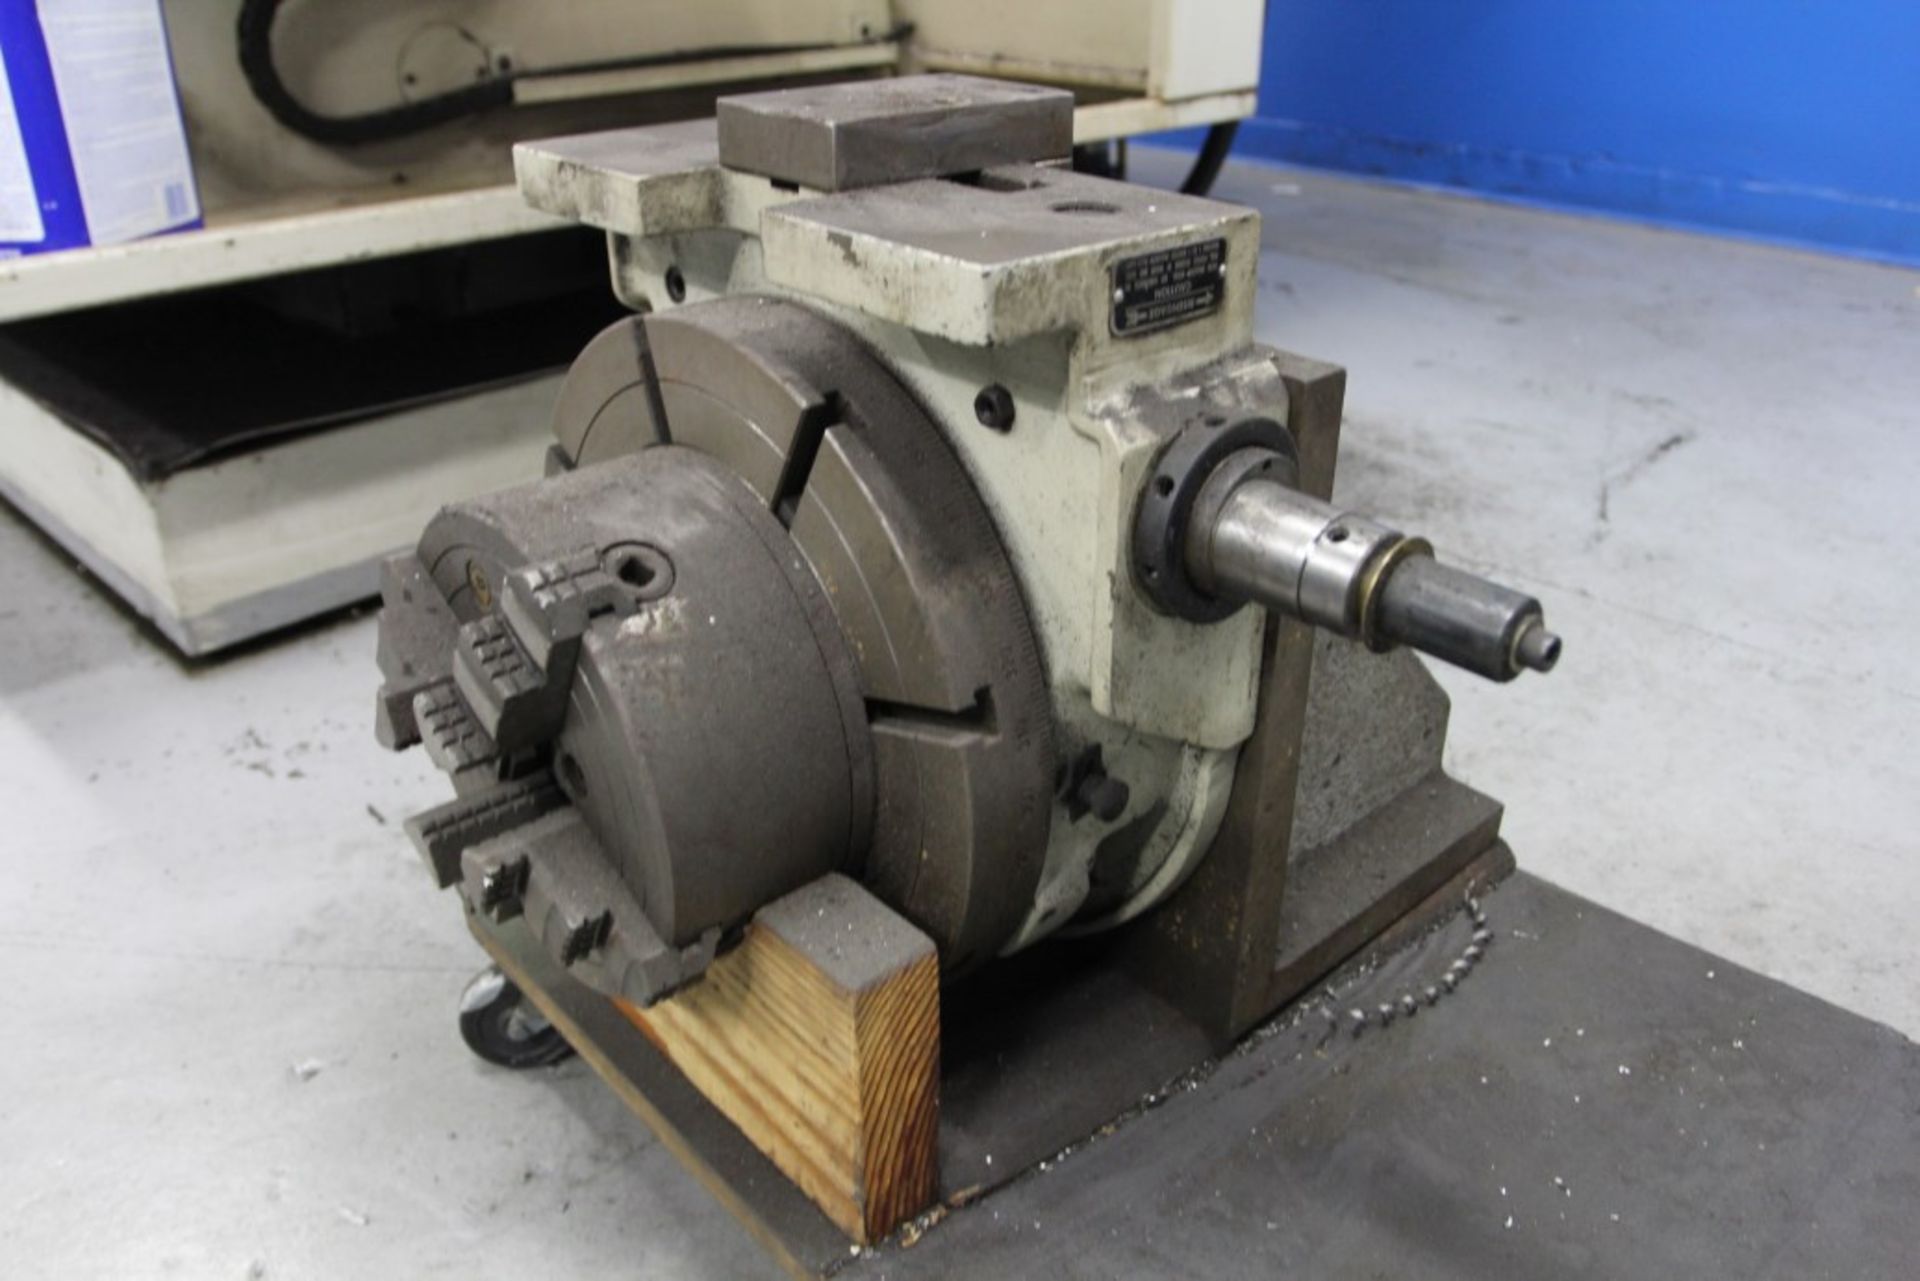 Troyke 12" Rotary Table w/ 8" Chuck - Image 2 of 2